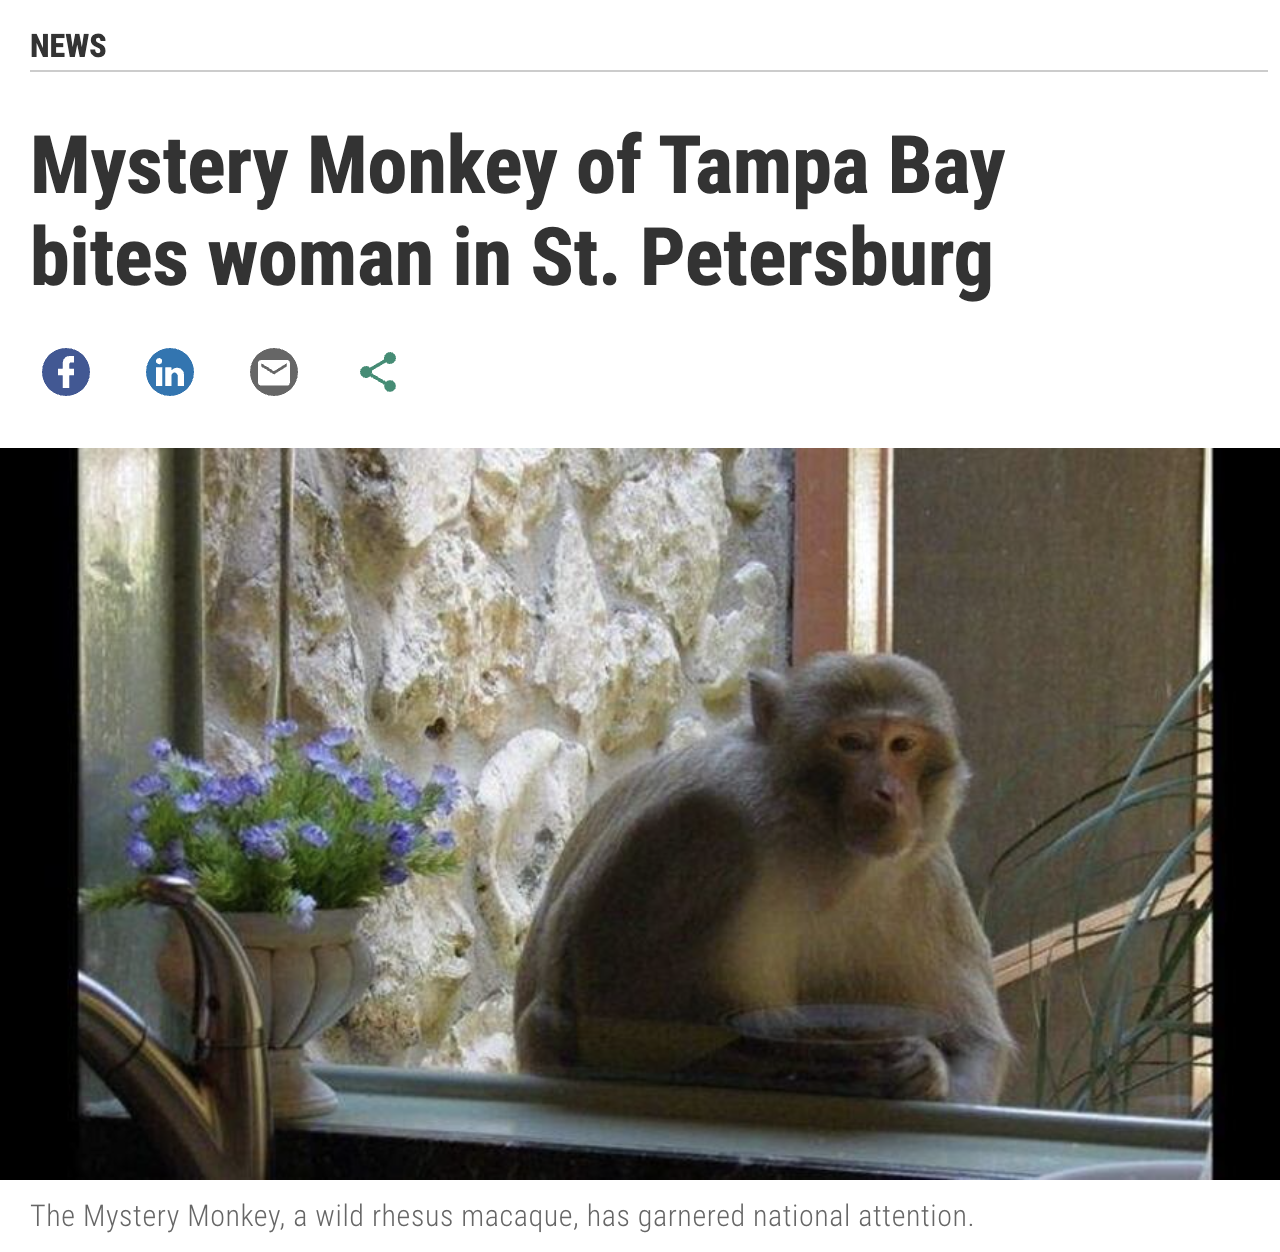 monkey inside house - News Mystery Monkey of Tampa Bay bites woman in St. Petersburg in The Mystery Monkey, a wild rhesus macaque, has garnered national attention.